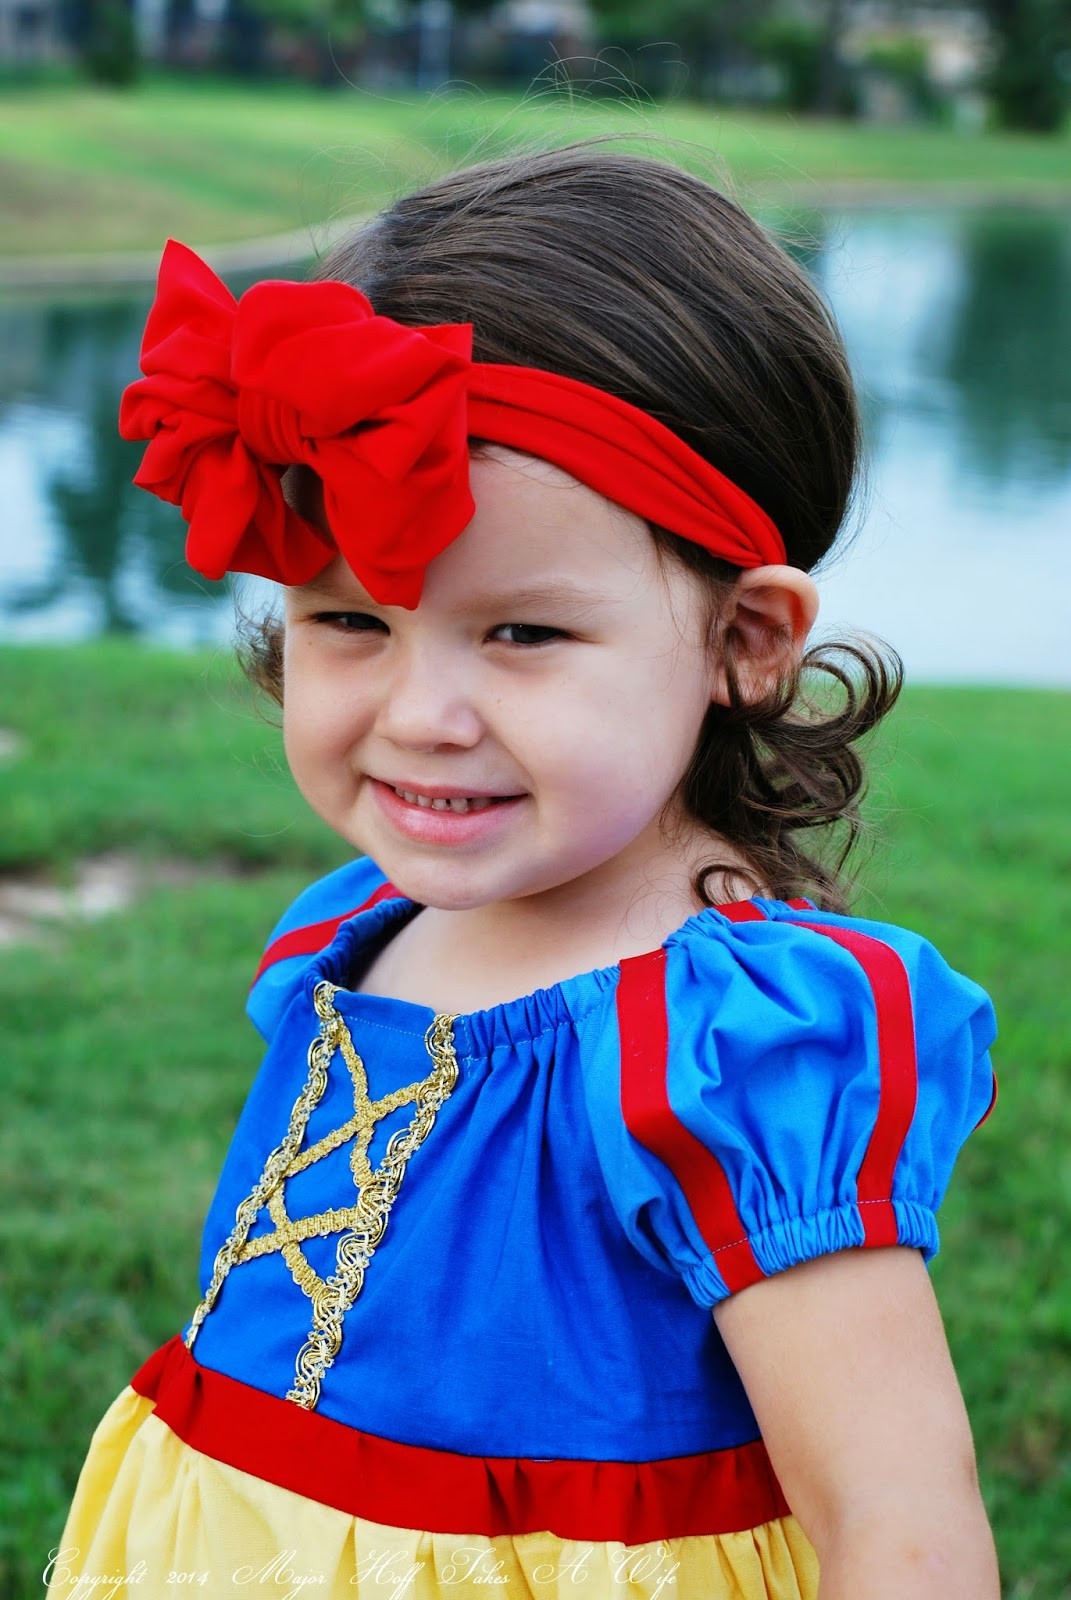 Snow White Costumes DIY
 Easy To Sew Snow White Peasant Dress For Halloween or